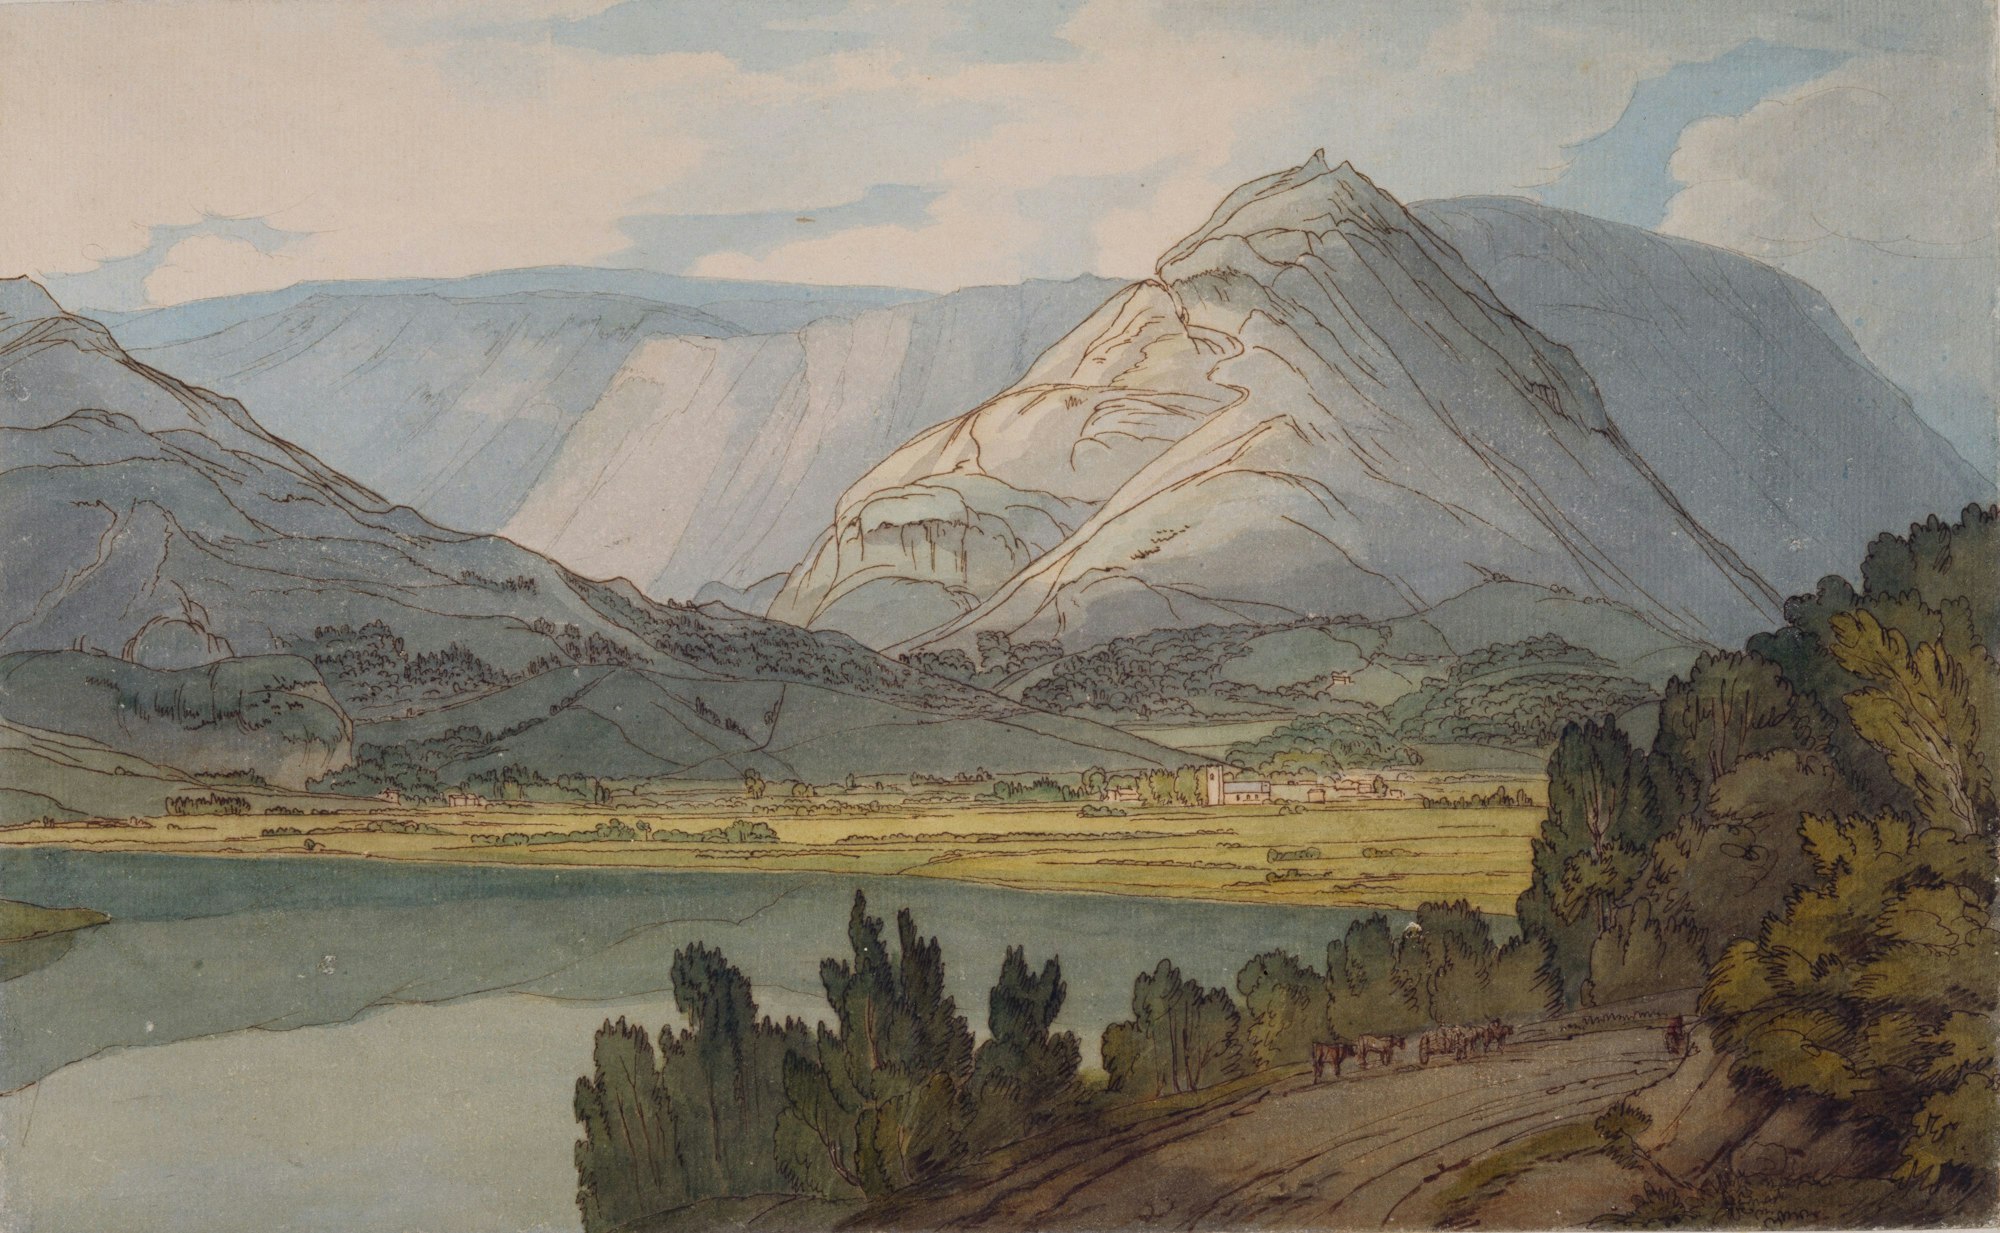 Grasmere From The Rydal Road, 1786, By Francis Towne
*In The Lake District, UK
